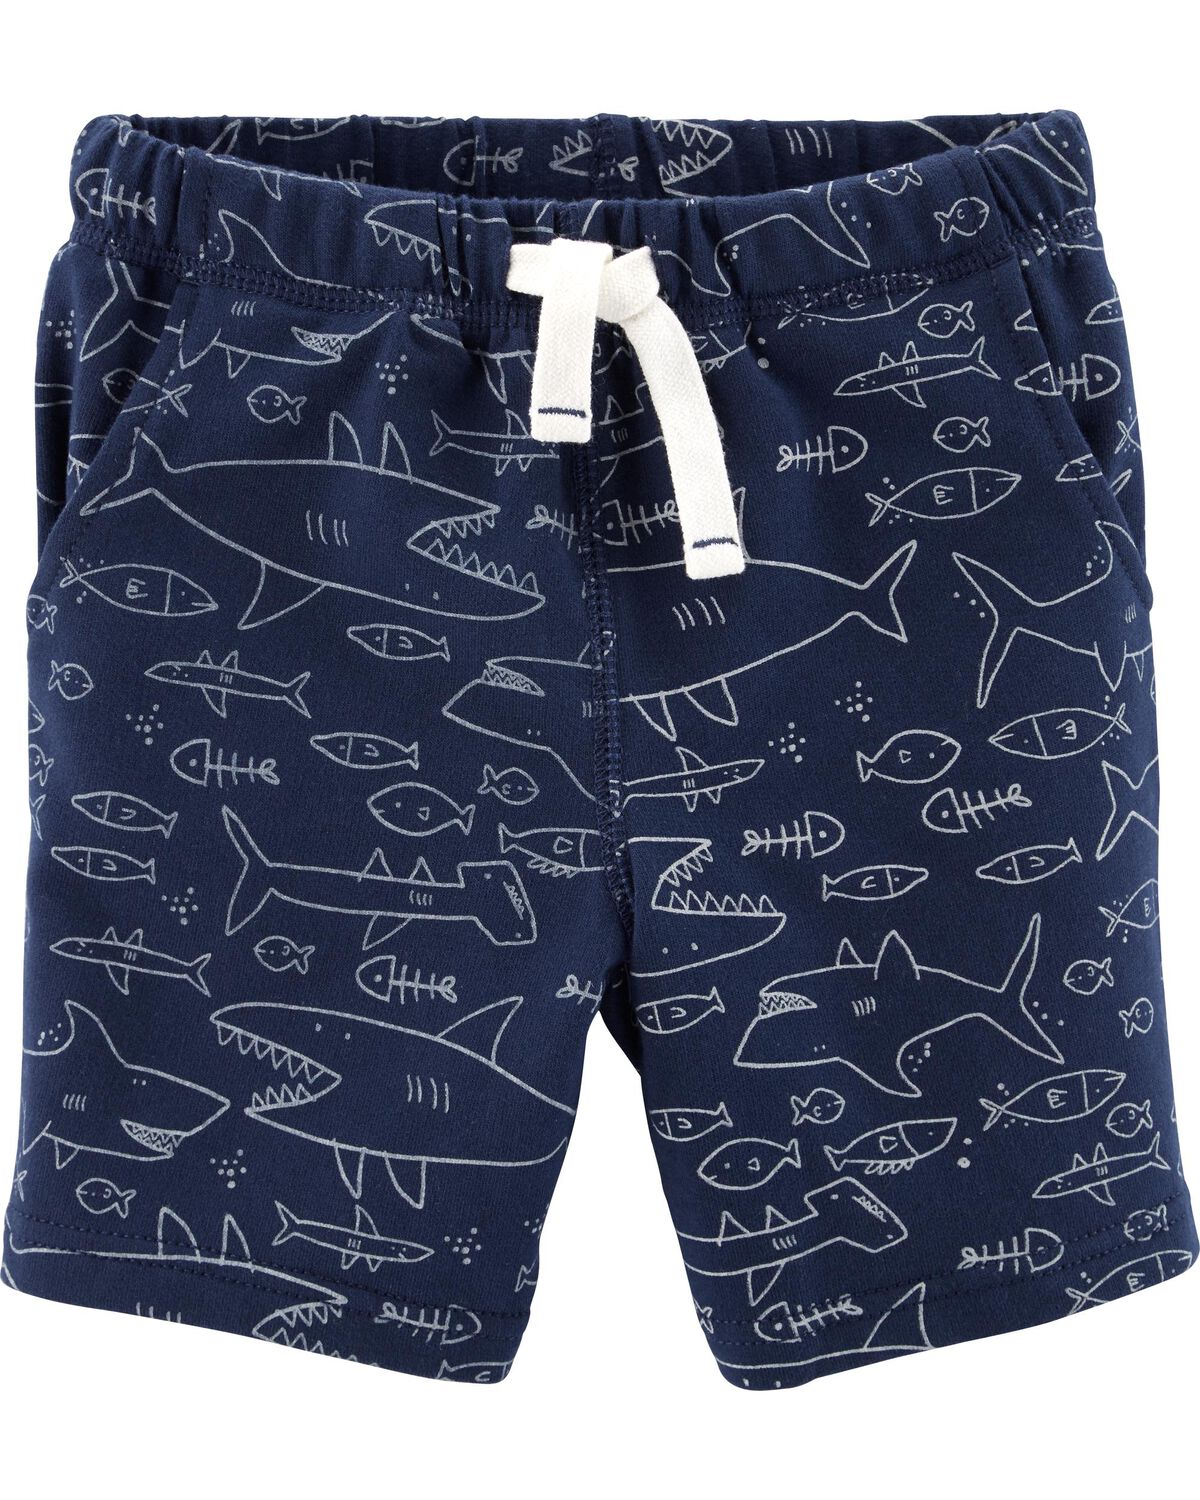 Shark Pull-On French Terry Shorts